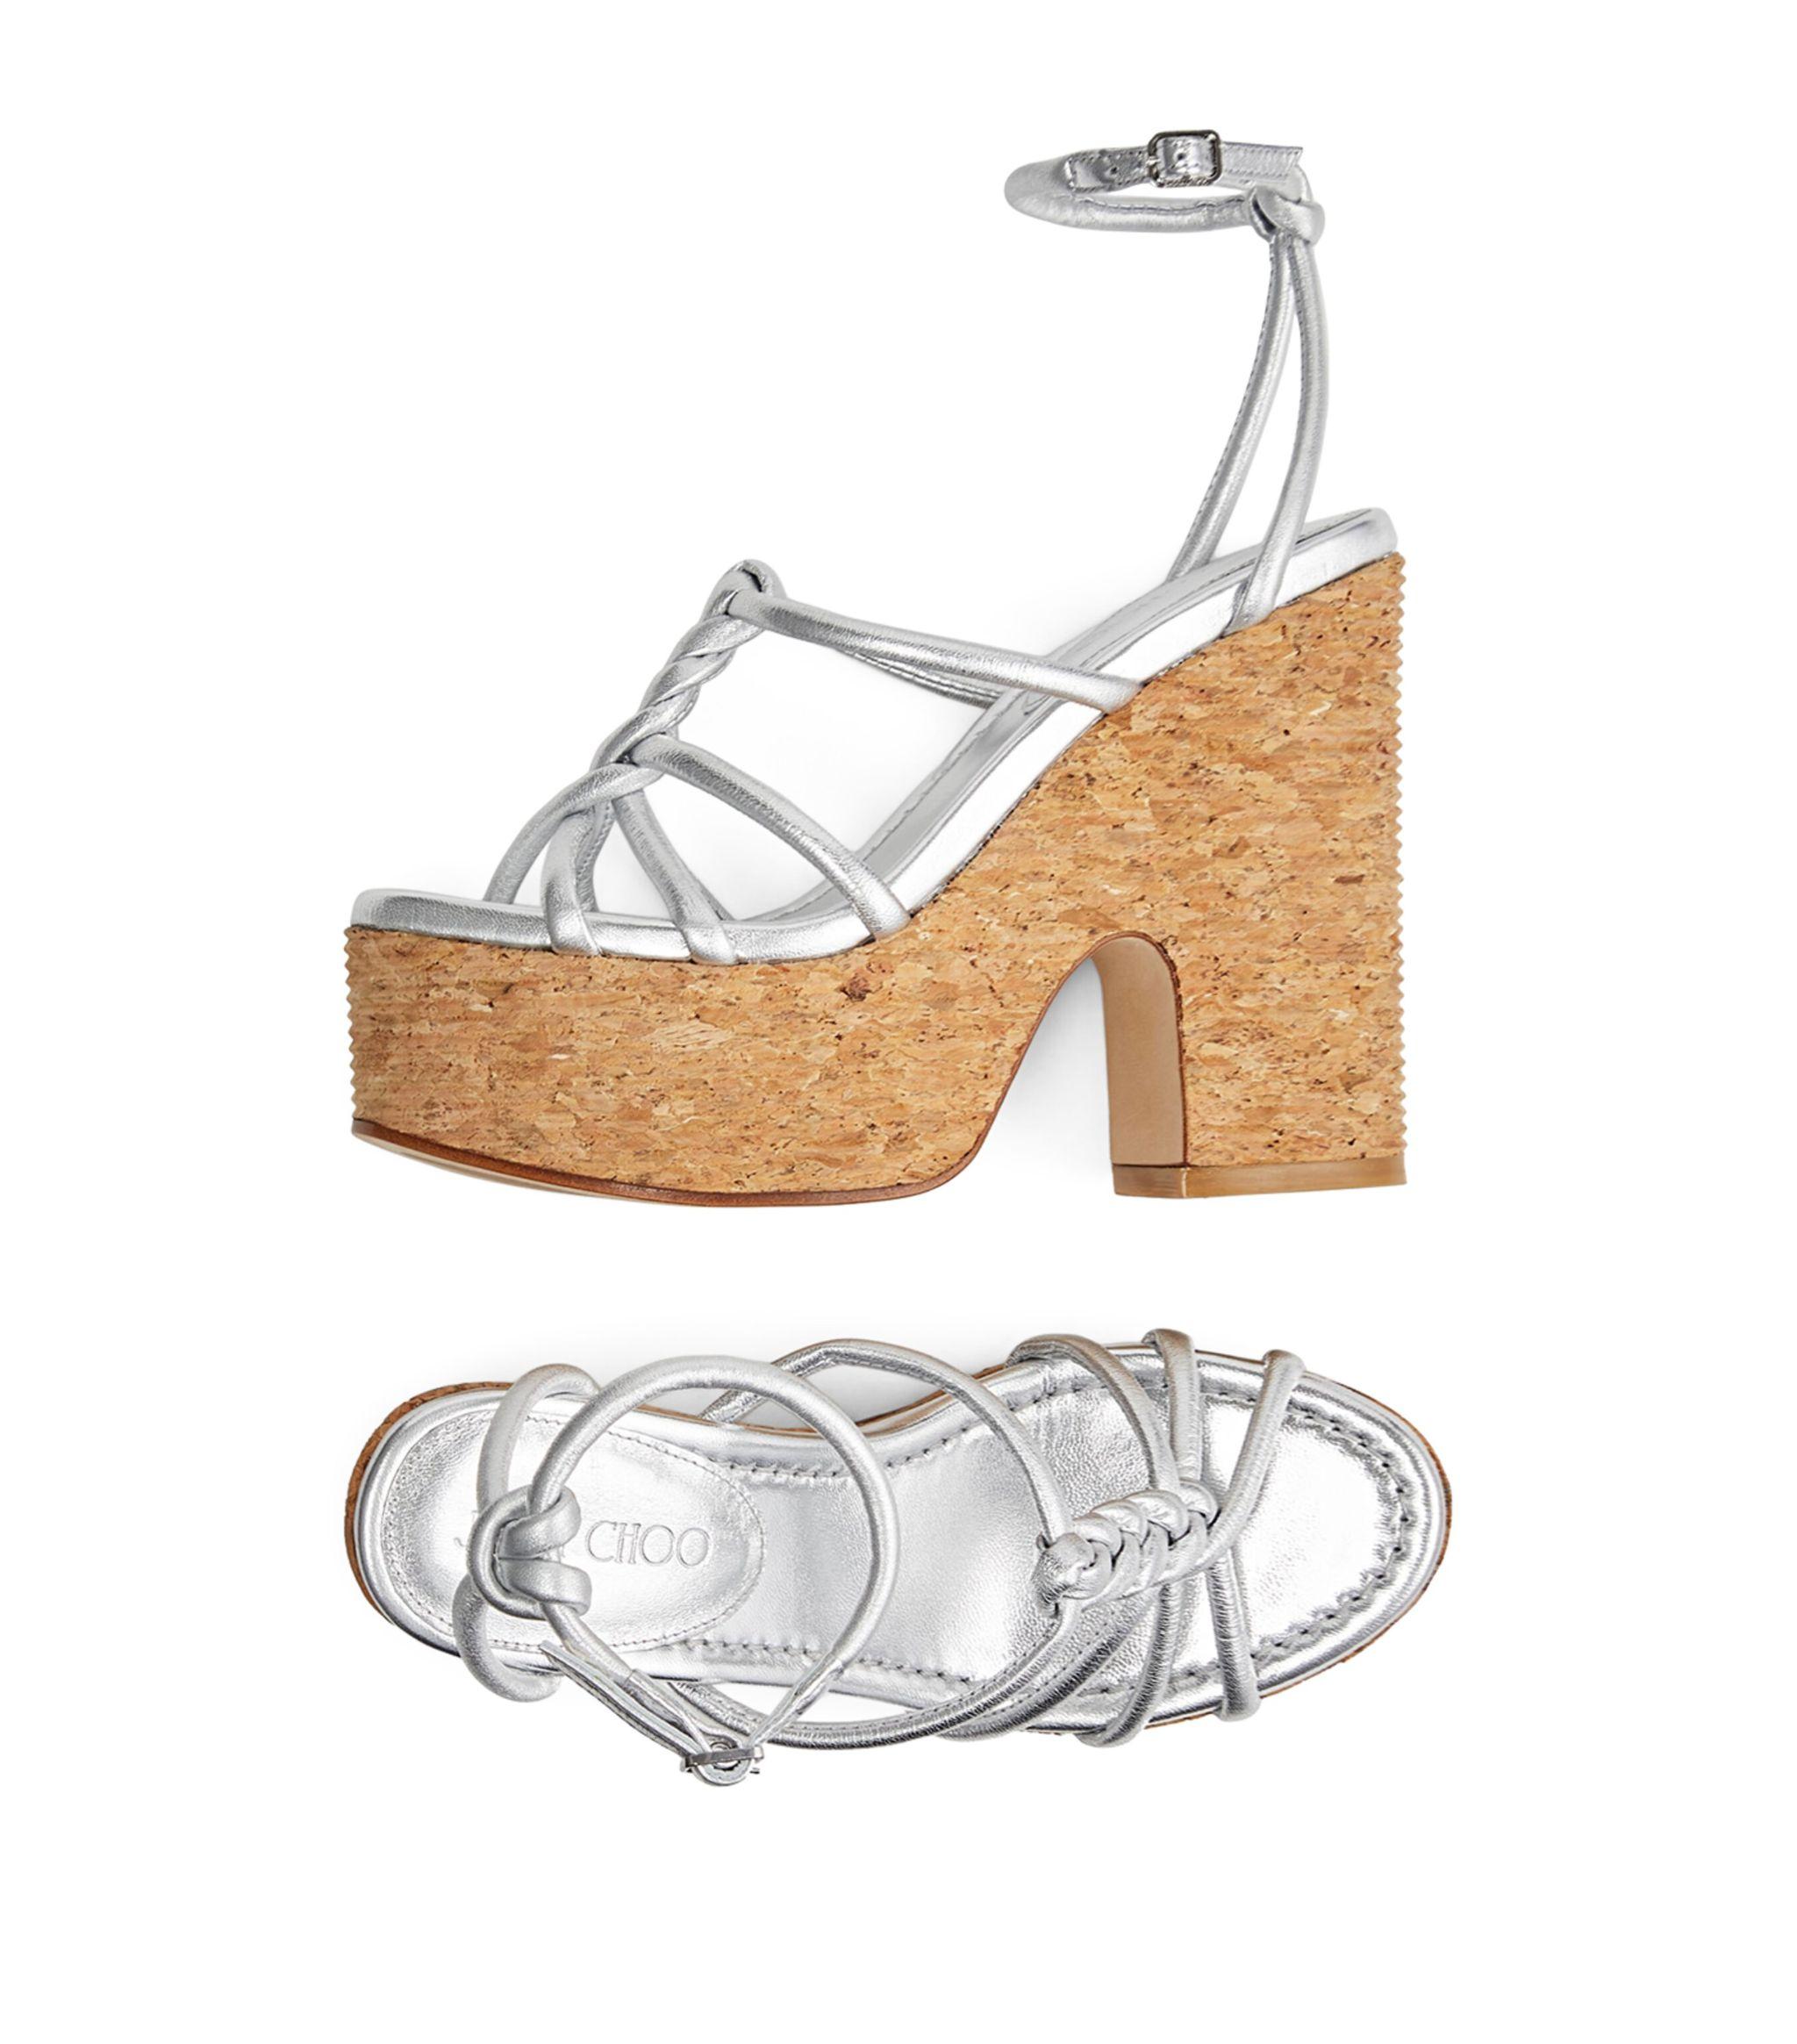 Jimmy Choo Clare 130 Wedge Sandals in White | Lyst